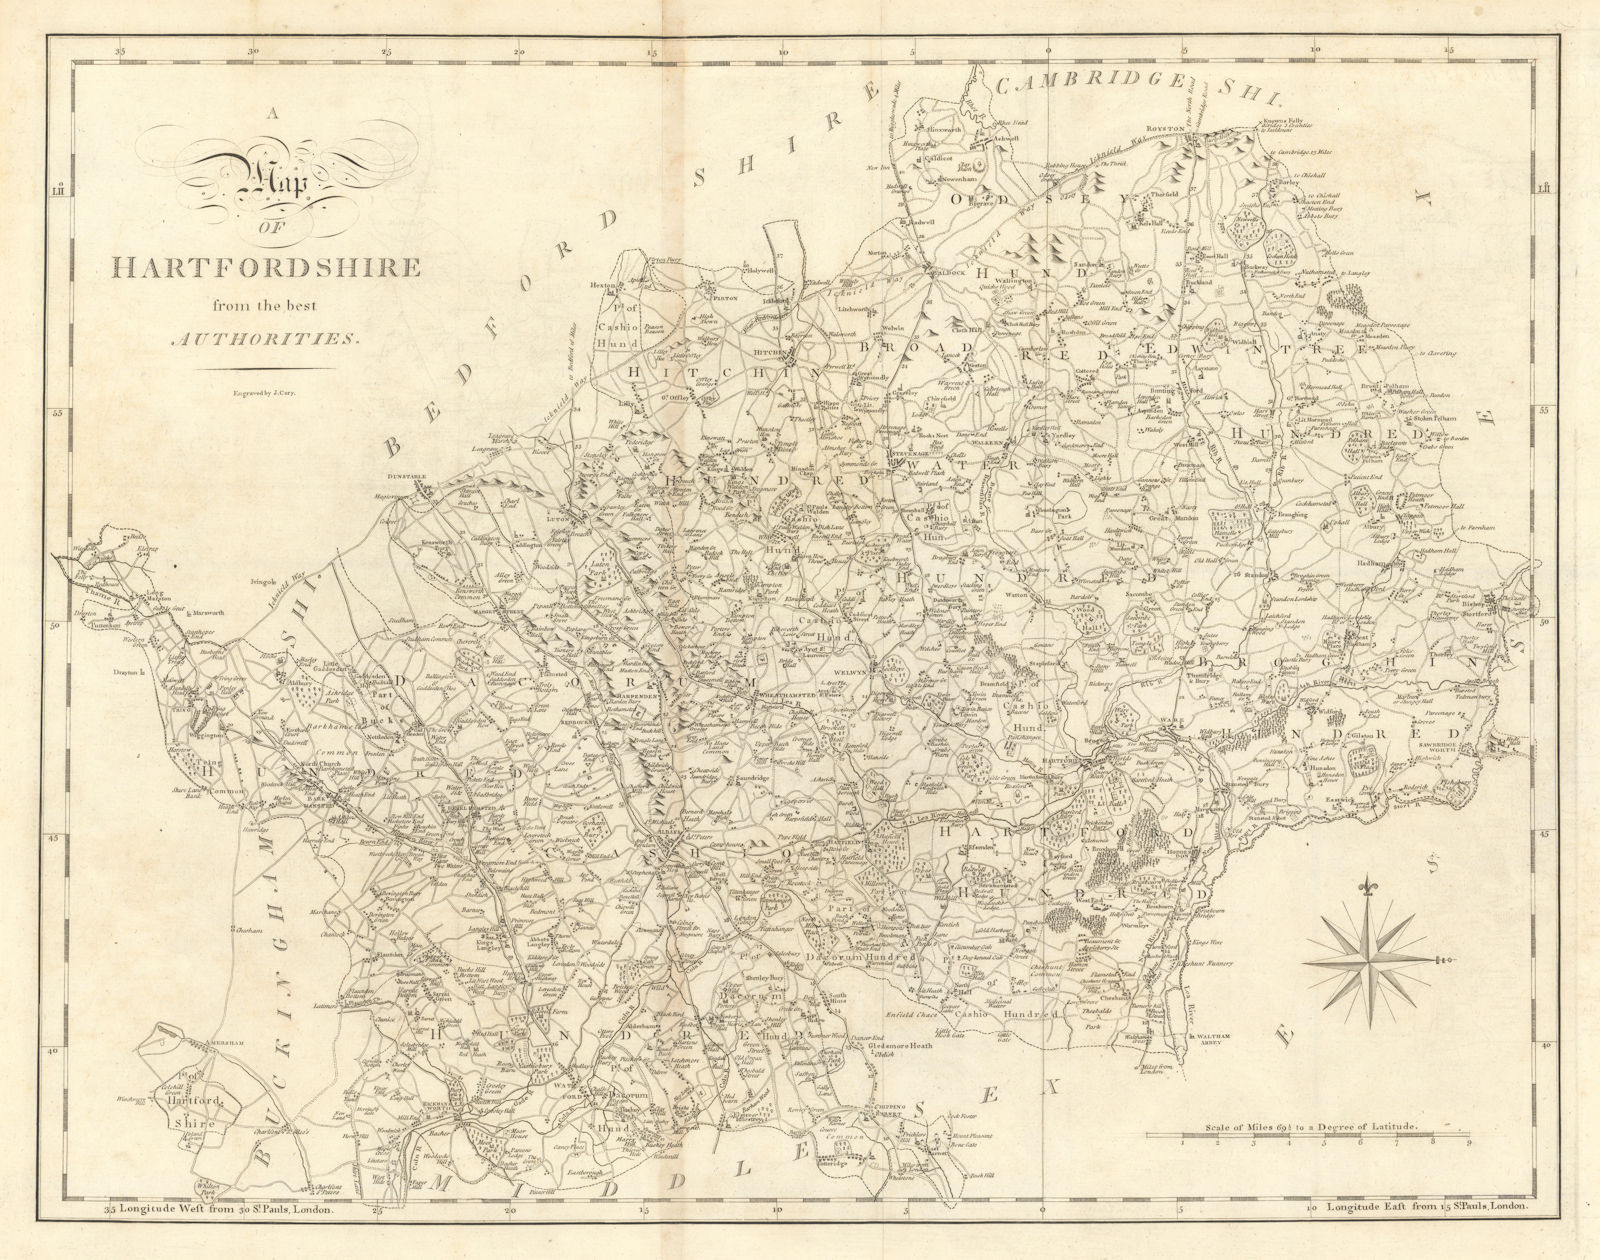 Associate Product "Hartfordshire from the best authorities". Hertfordshire county map. CARY 1789